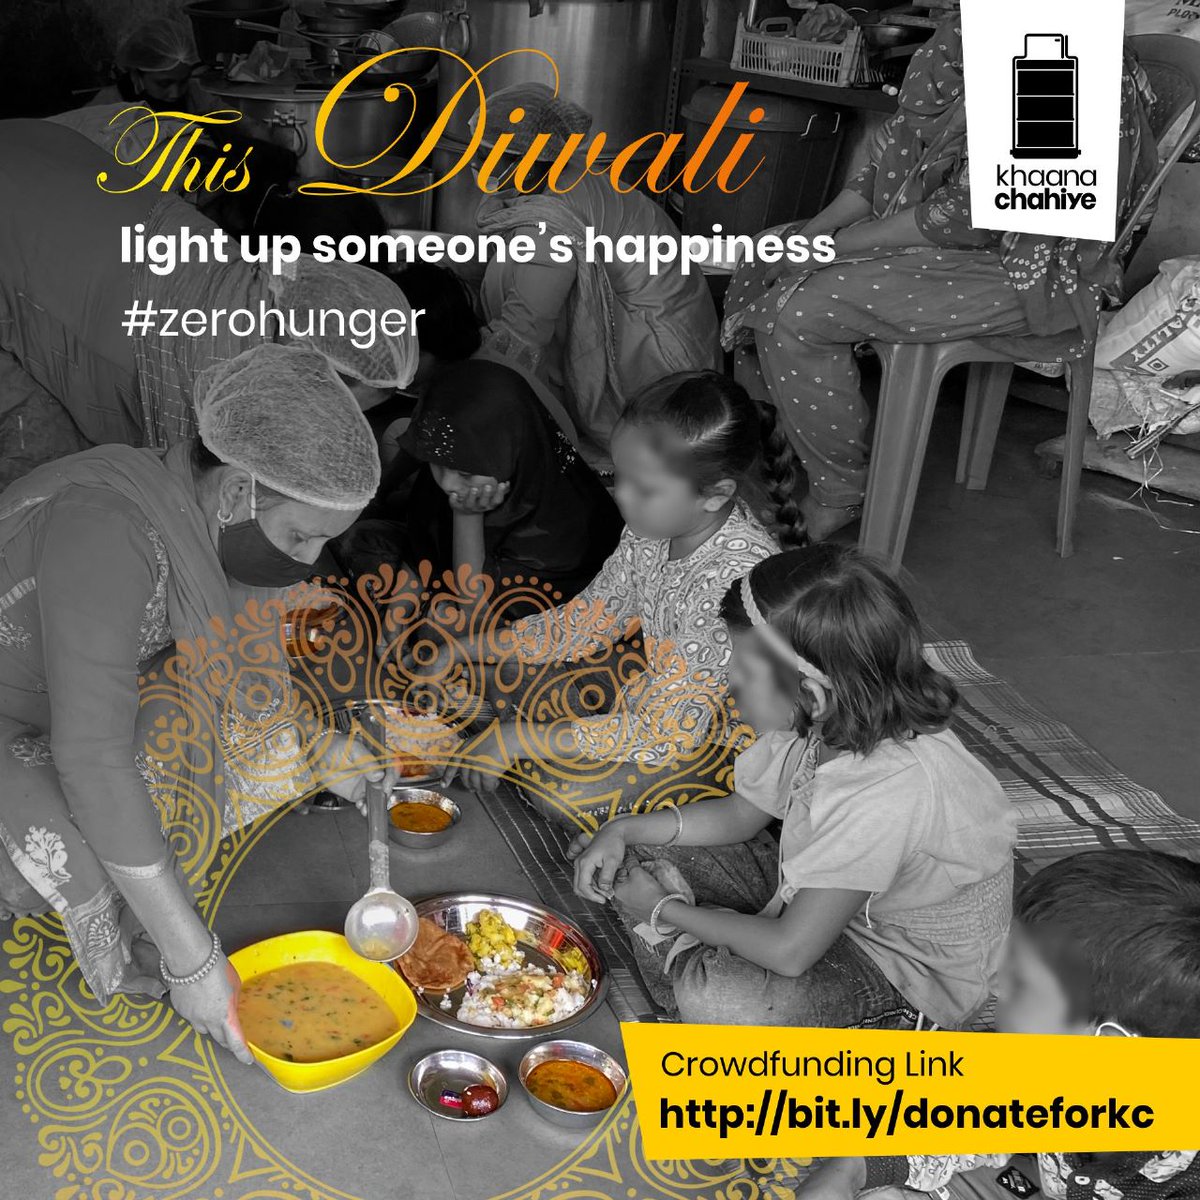 This festive season share the greatest language of love - food, with those who aren’t as fortunate. Light up their happiness by ensuring their stomachs are full. Join us in our fight against hunger. Support bit.ly/donateforkc #zerohunger #mumbai #khaanachahiye #diwali2022